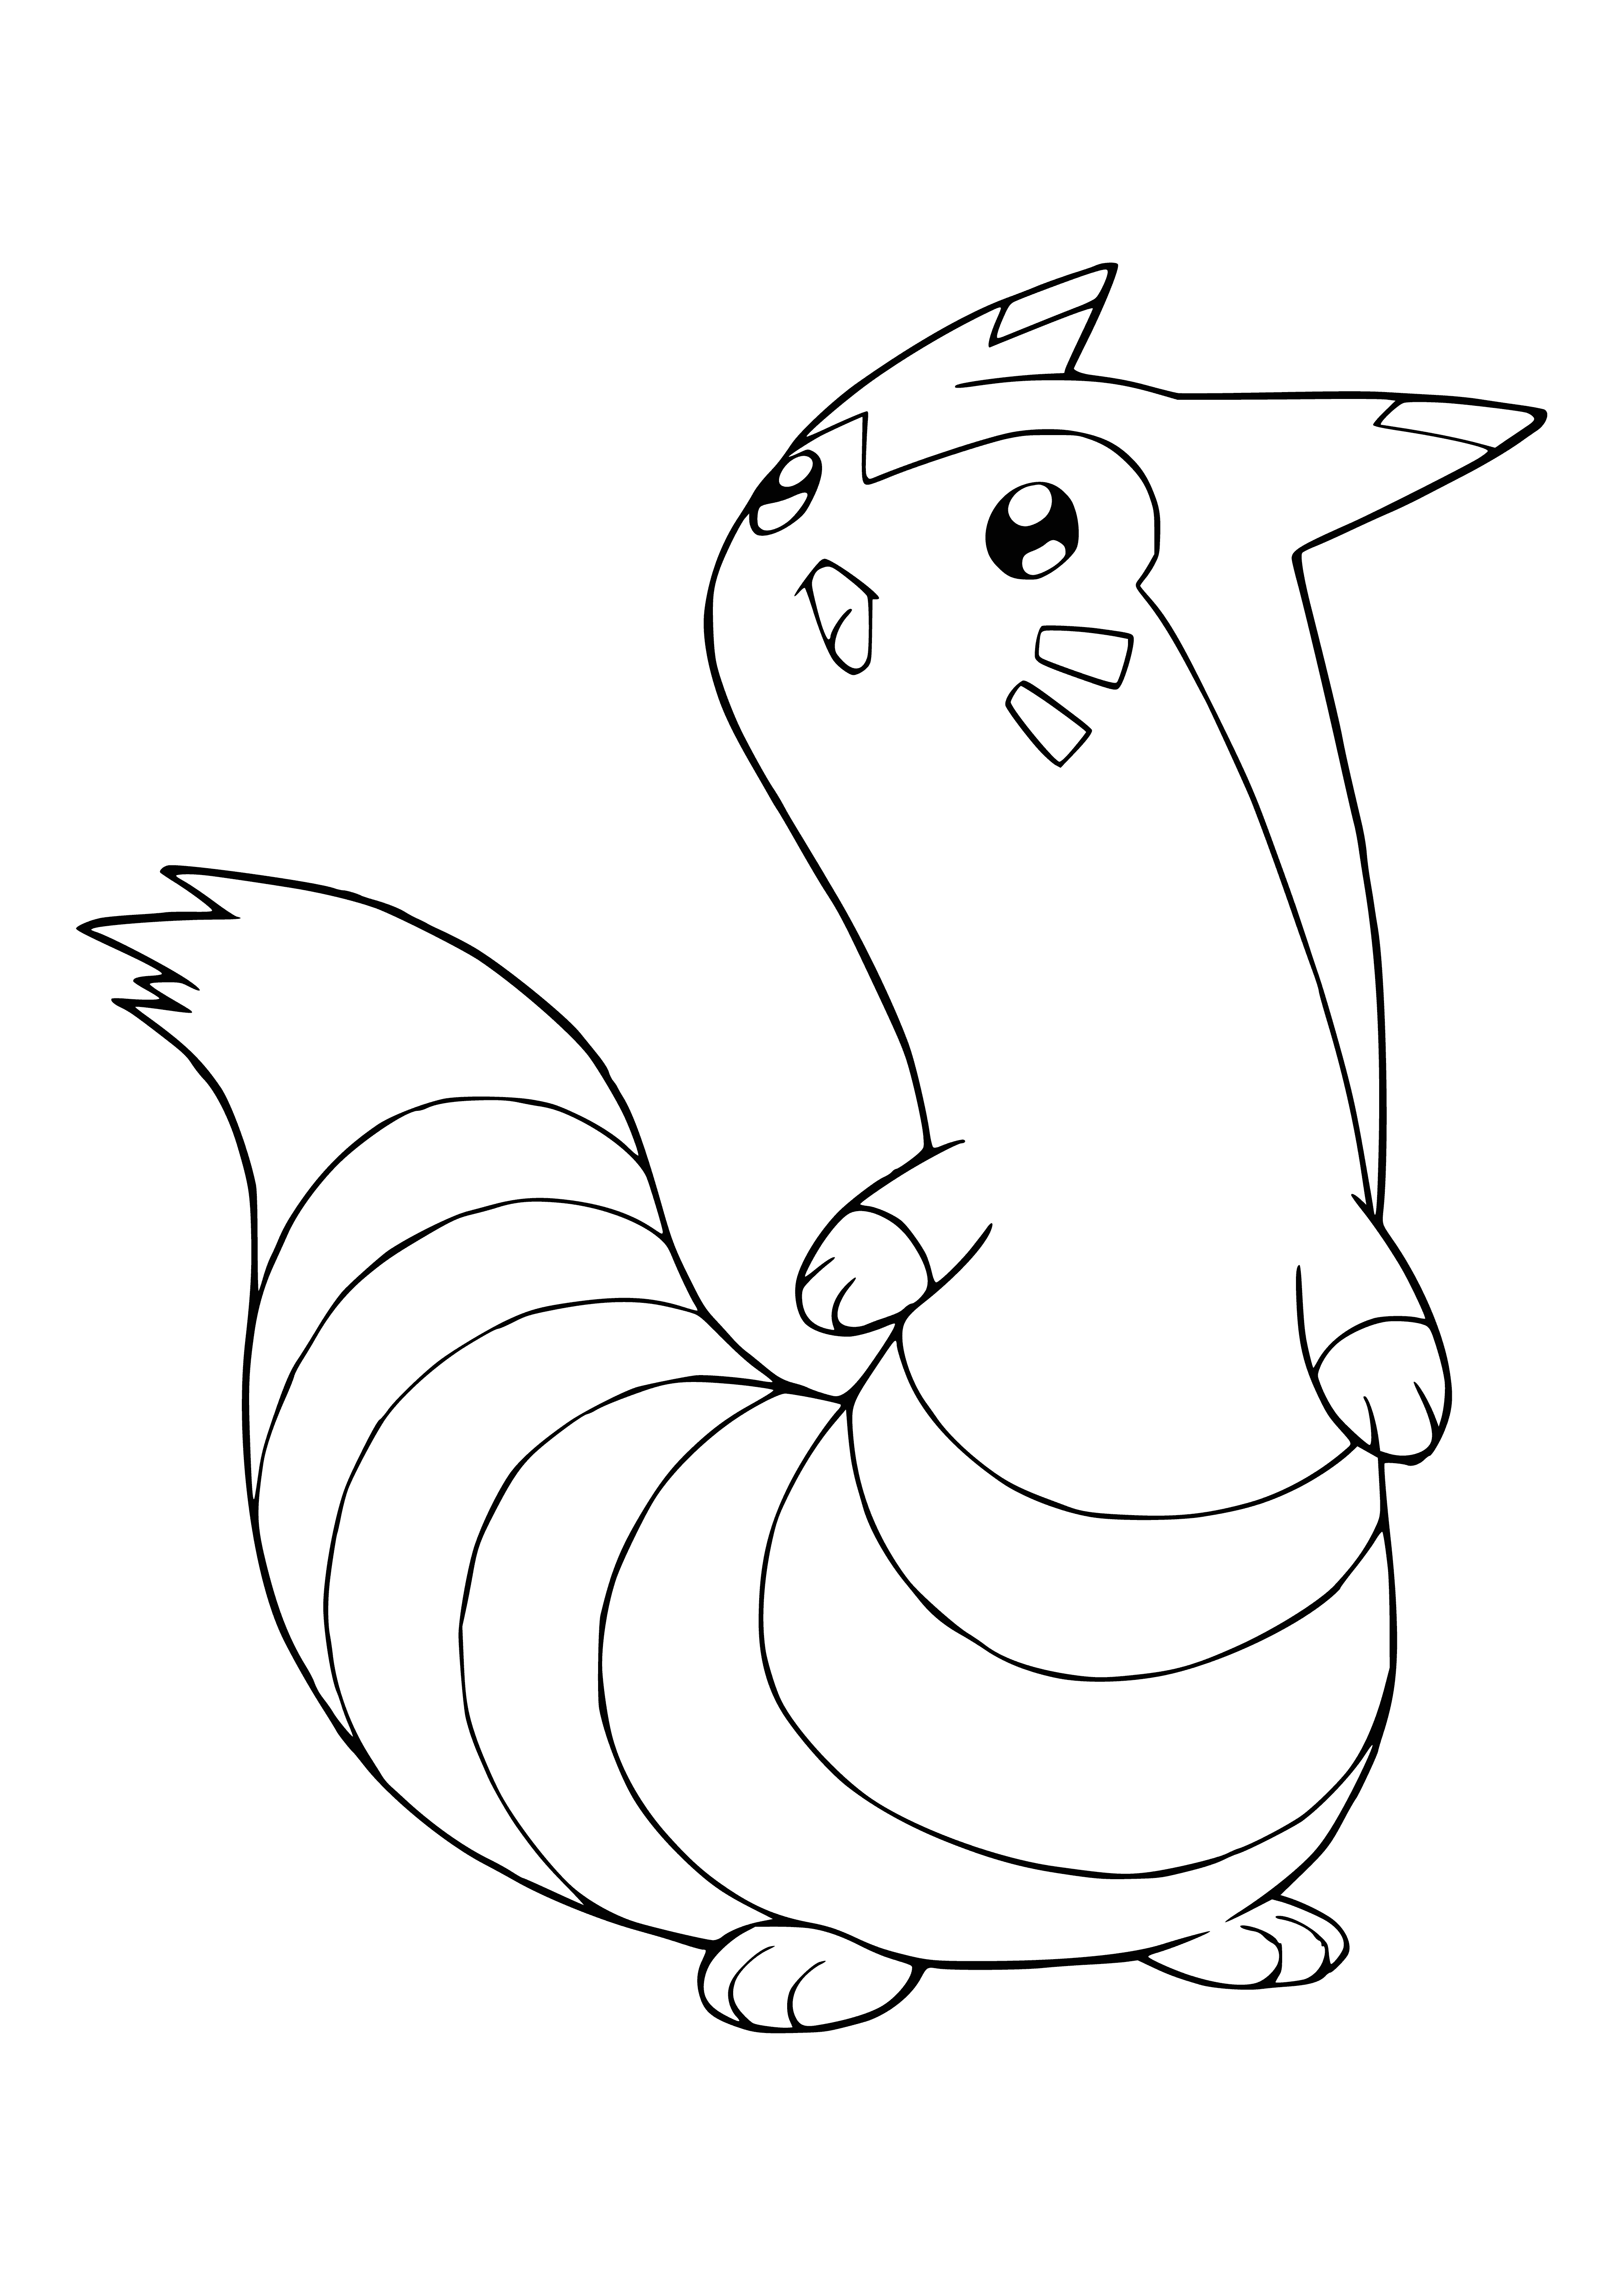 coloring page: Furret is a long, brown and cream Pokemon with a long neck, small head, blue eyes and four legs, plus a long tail.